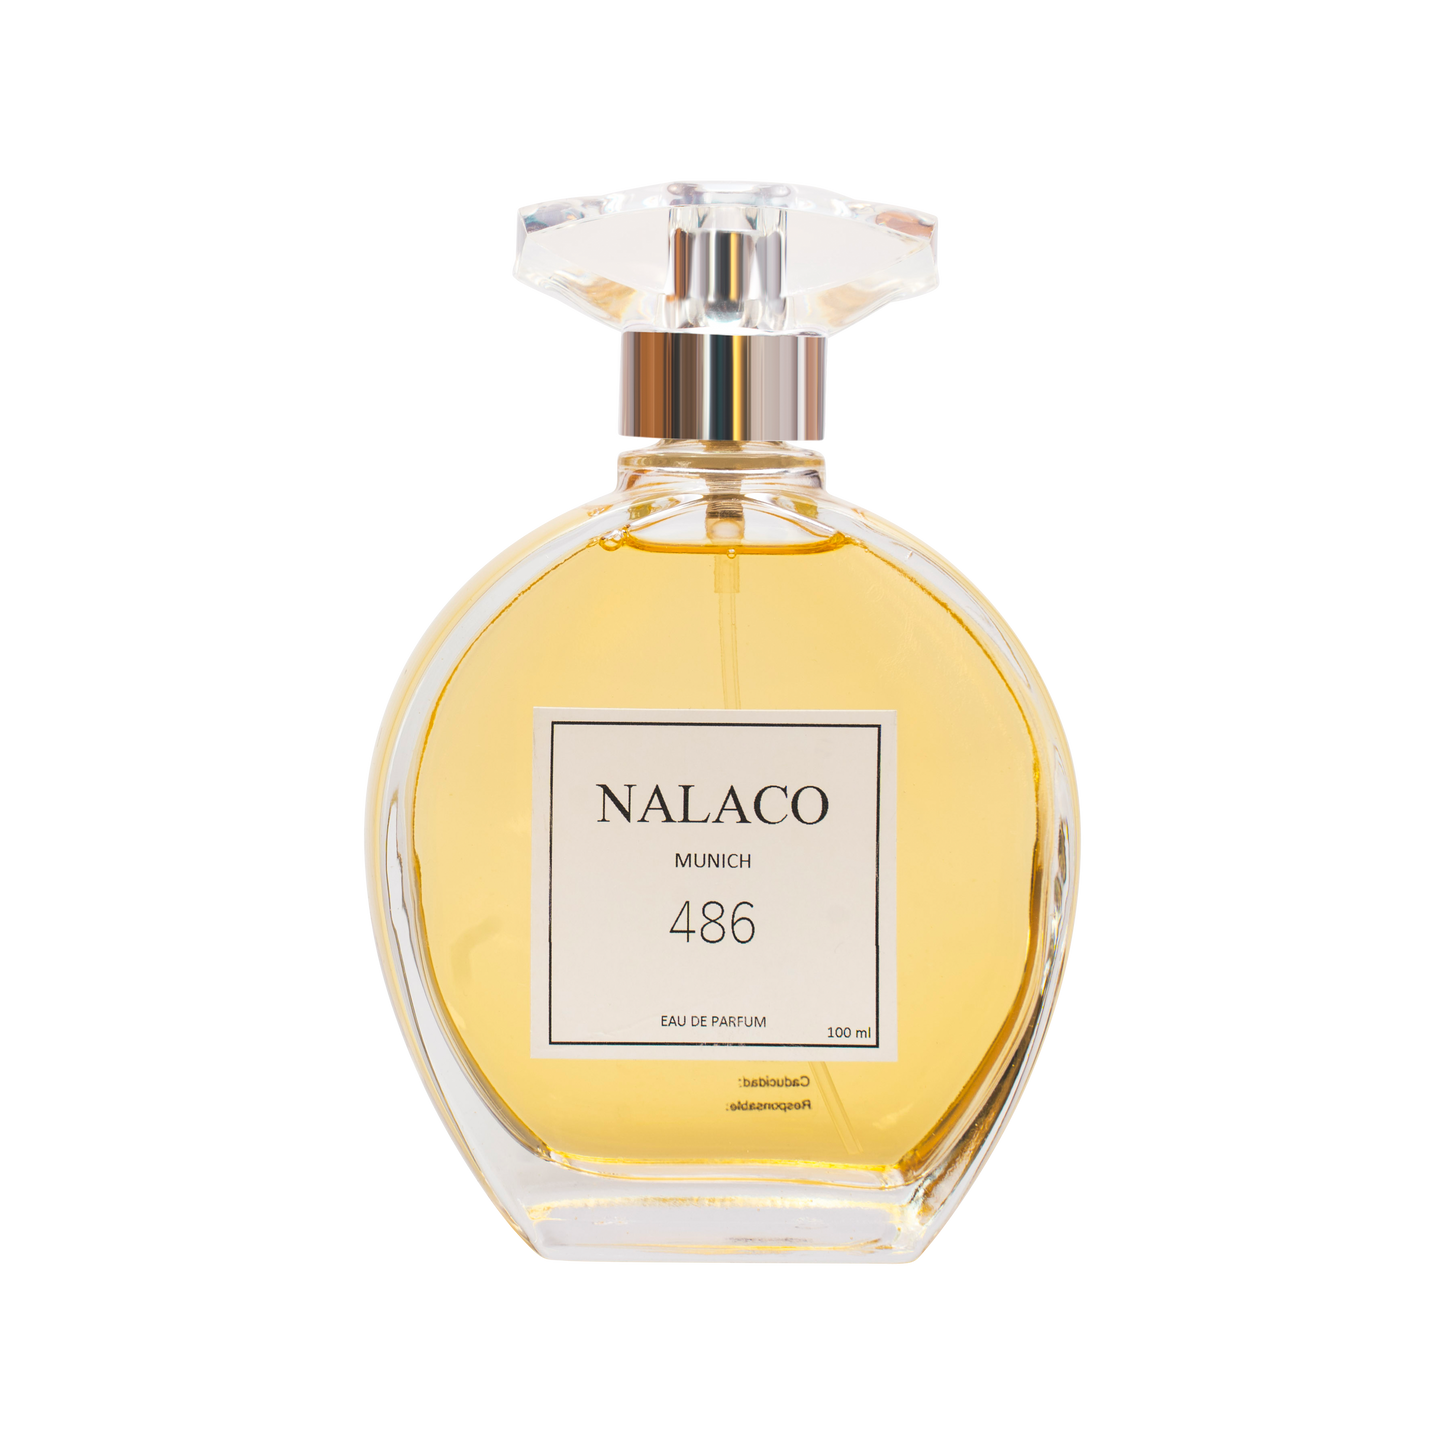 Nalaco No. 486 inspired by Hugo Boss The Scent for Her